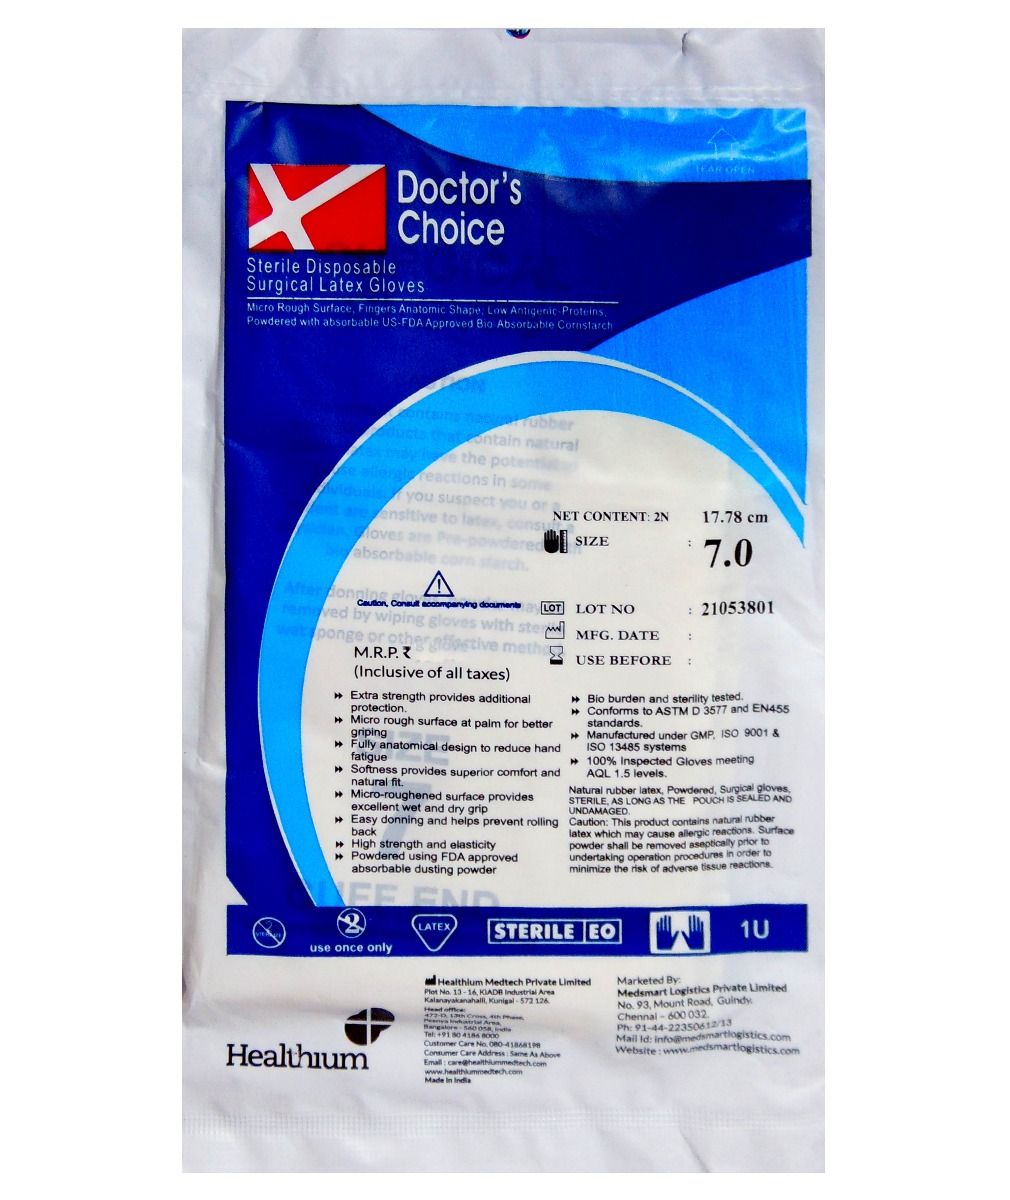 Buy Doctors' Choice Sterile Disposable Surgical Latex Gloves Size-7.0, 1 Pair Online